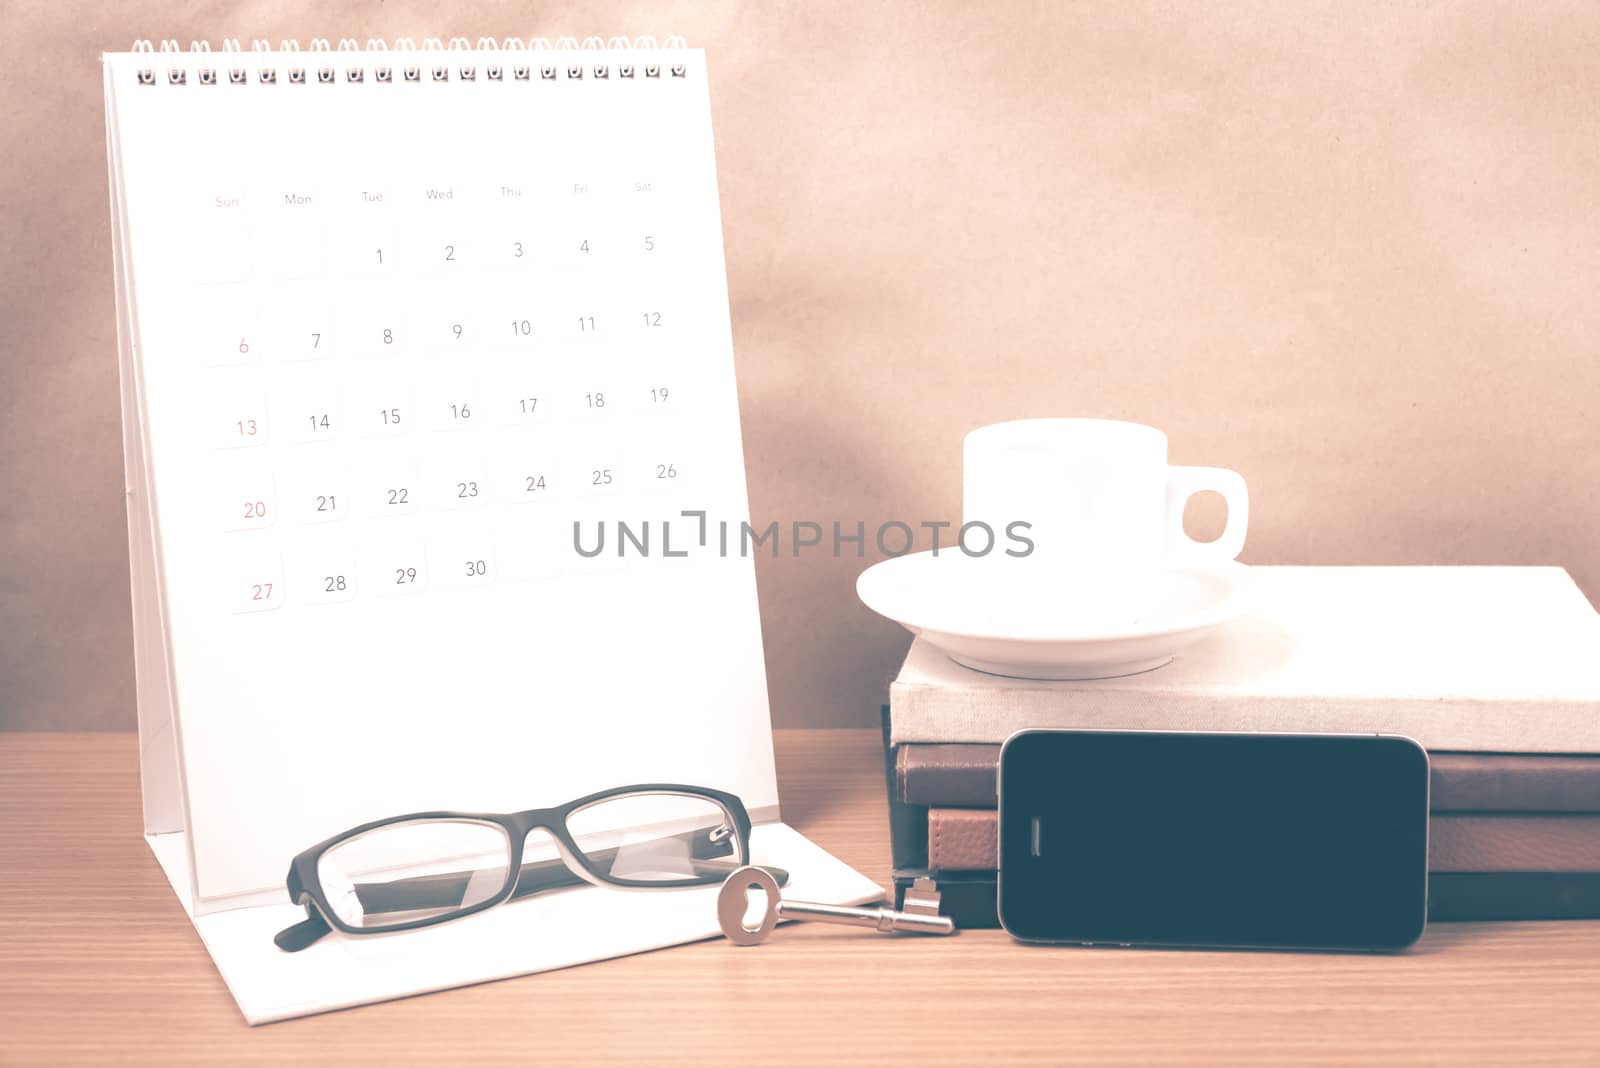 coffee and phone with key,eyeglasses,stack of book,calendar vint by ammza12